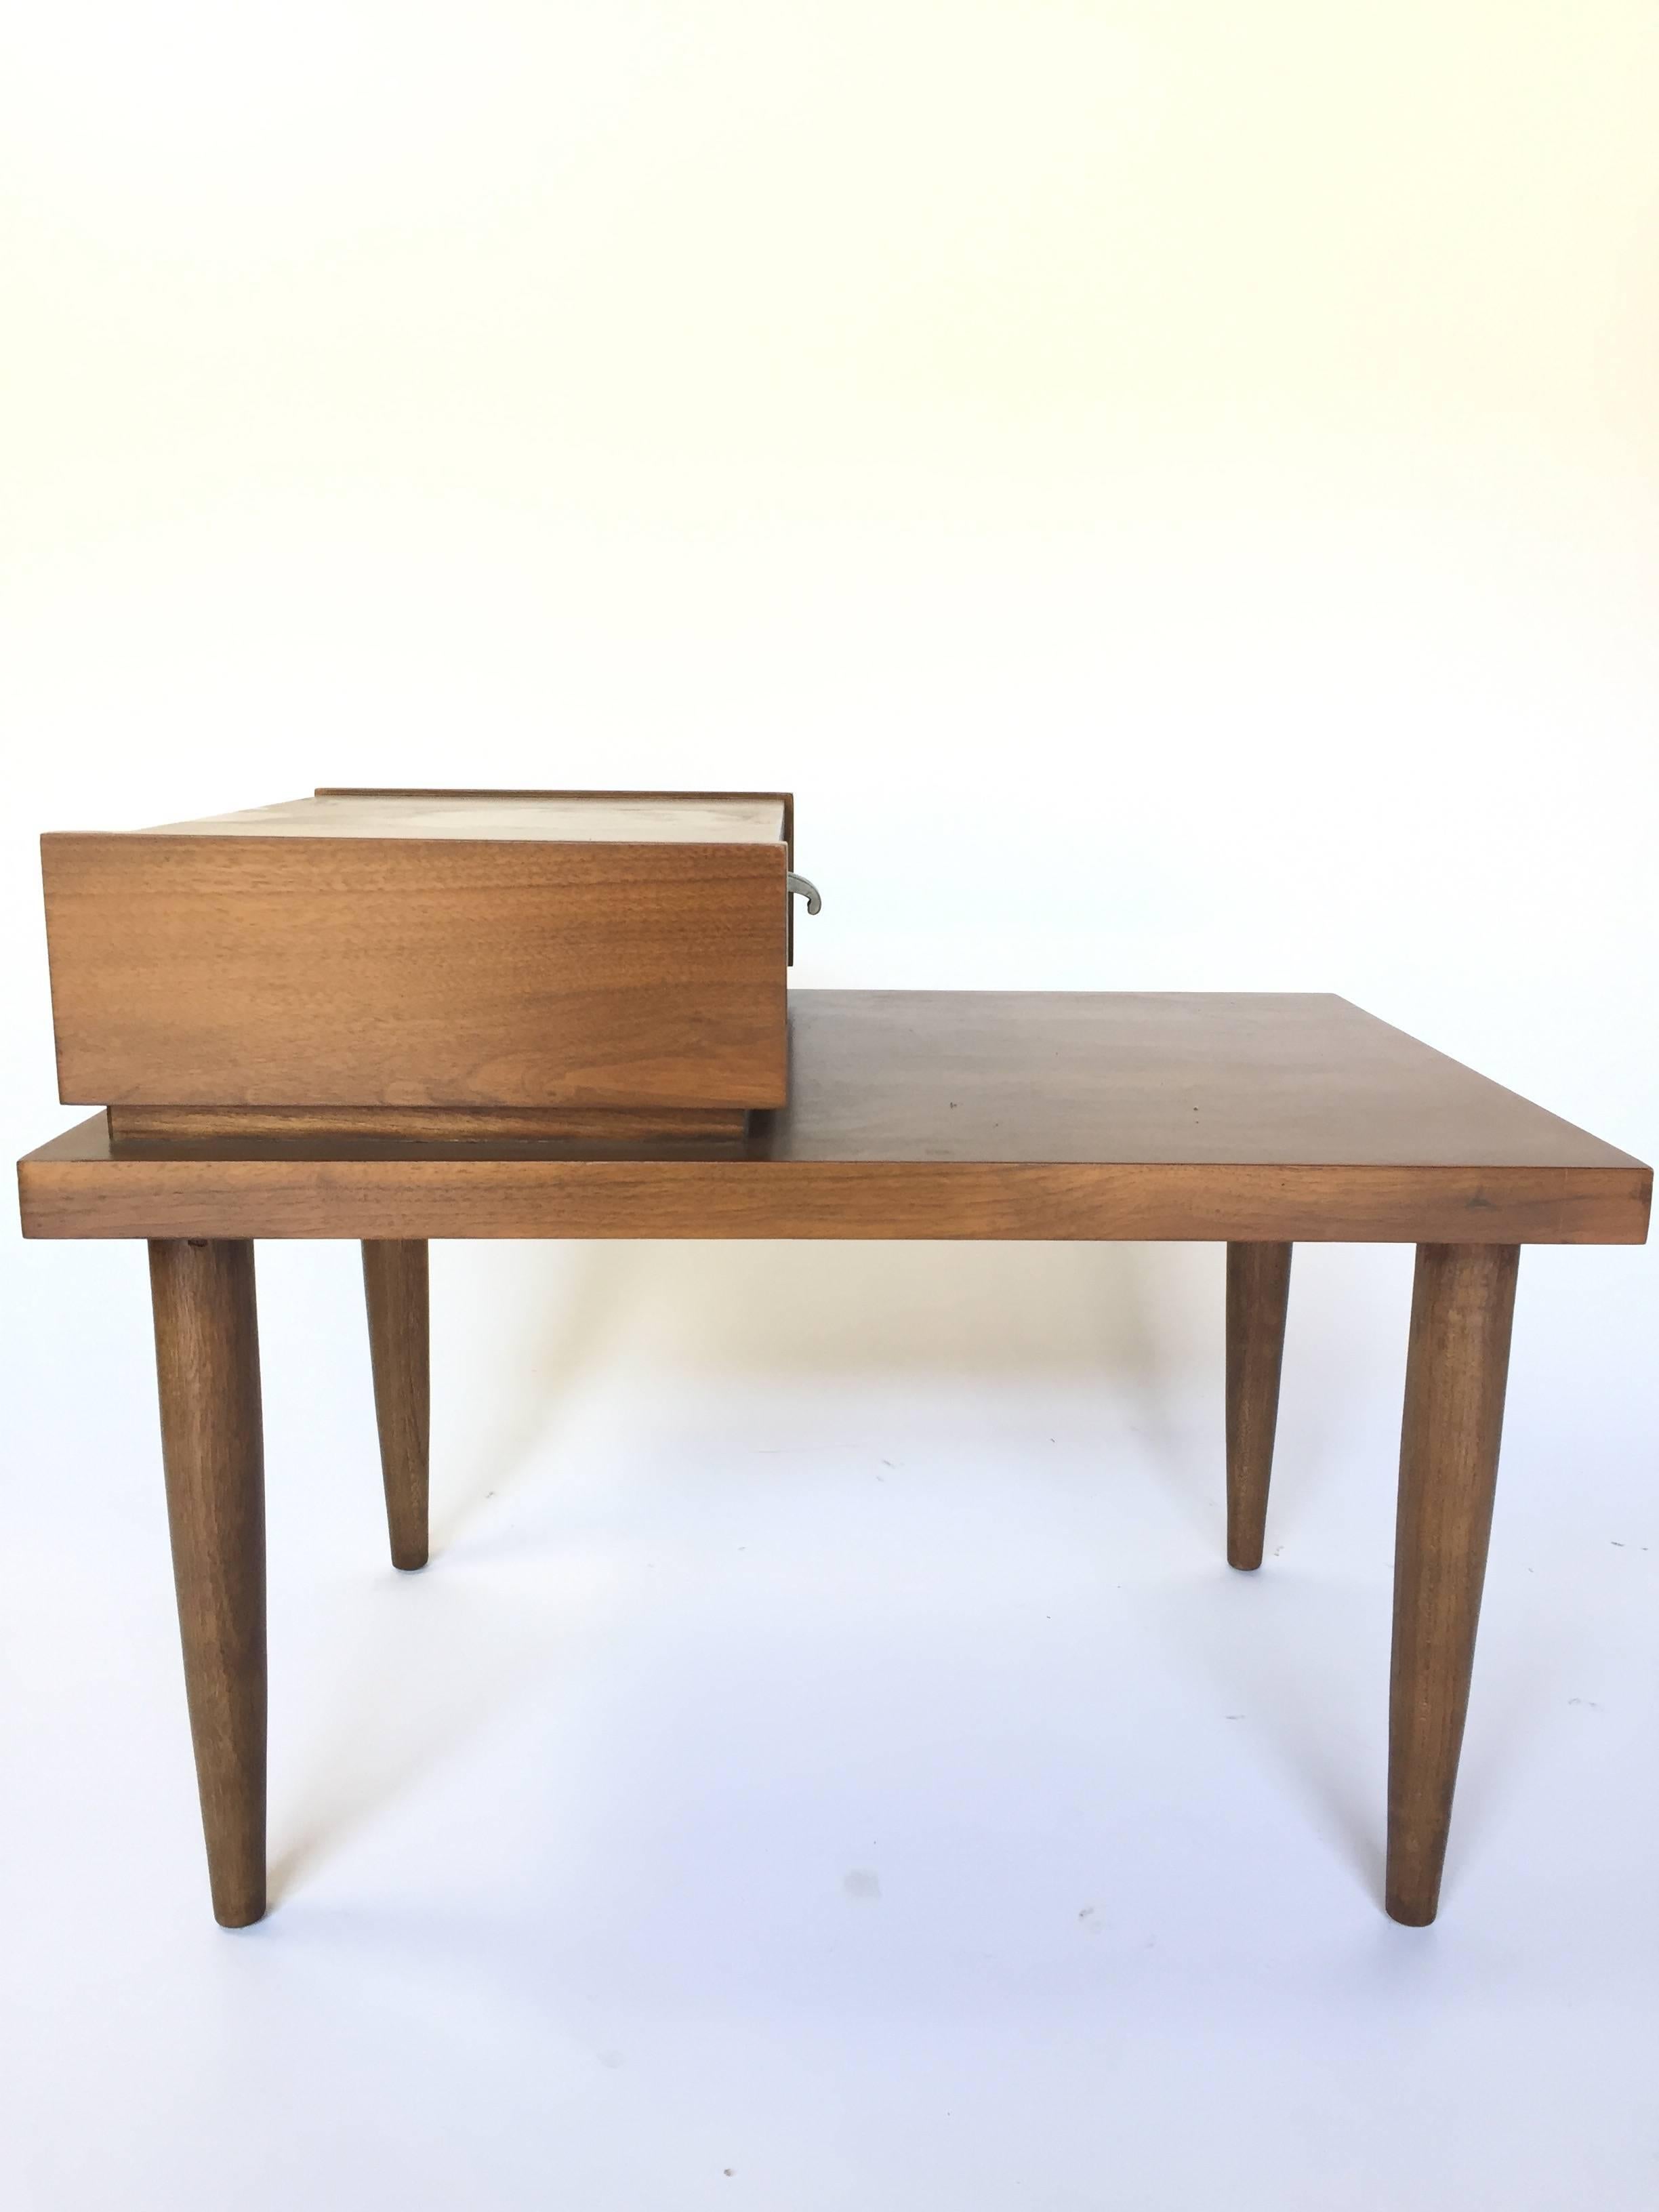 Pair of Mid-Century Modern nightstands / end tables by American of Martinsville. Features beautifully refinished walnut, an attractive step design, and a single drawer with George Nelson style J-pulls. Priced as a pair.